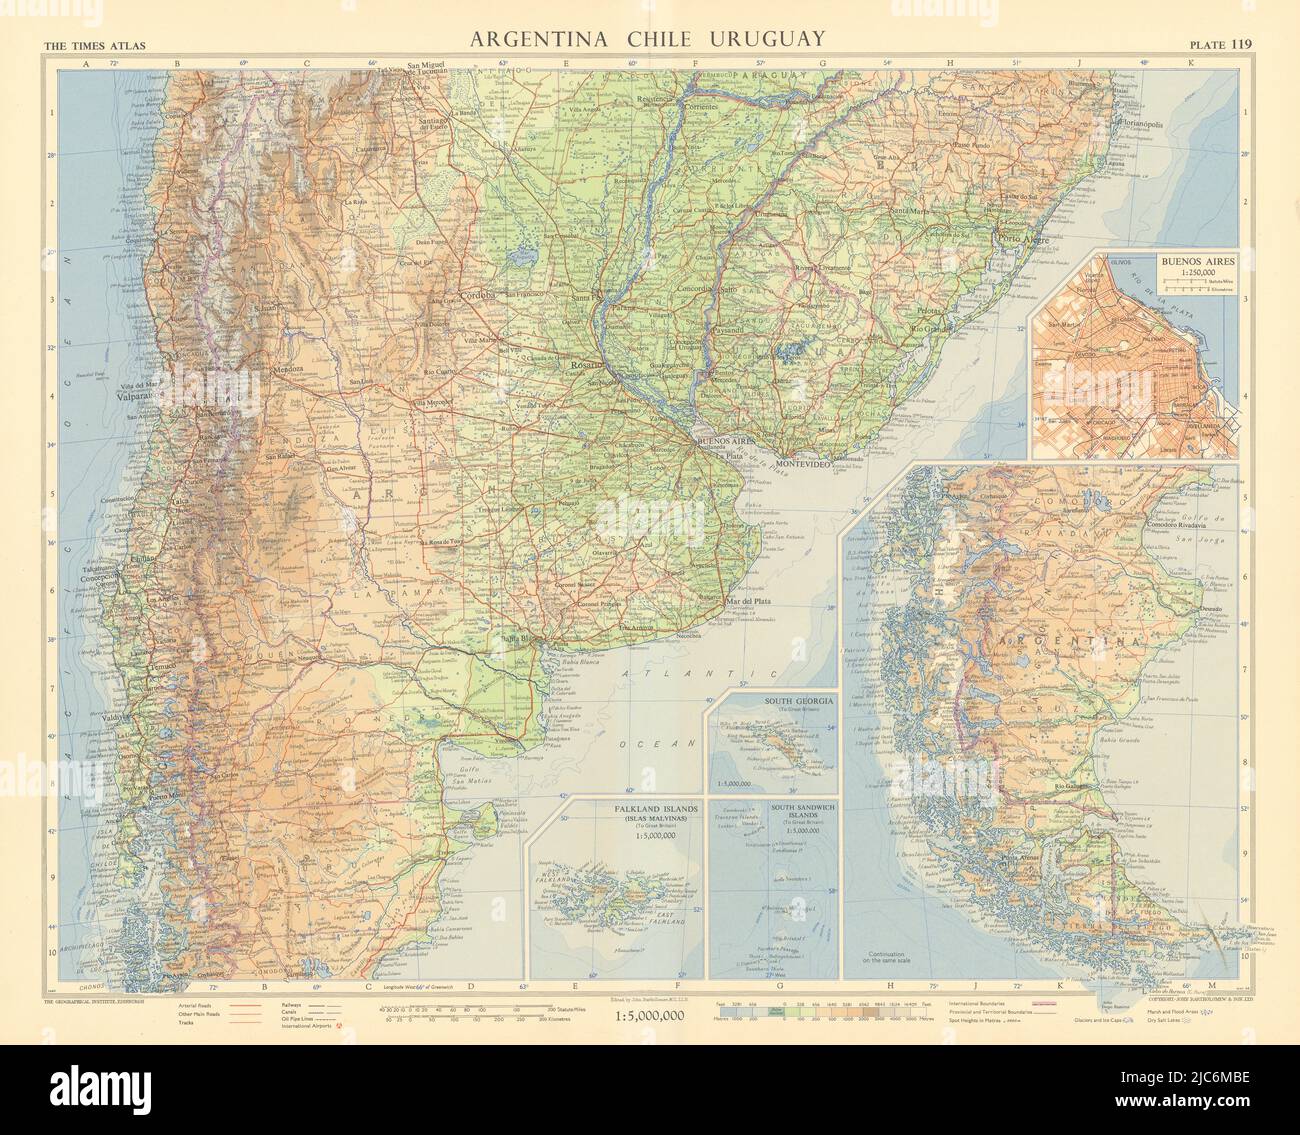 Argentina Chile Uruguay. Buenos Ayres plan. South America. TIMES 1957 old map Stock Photo